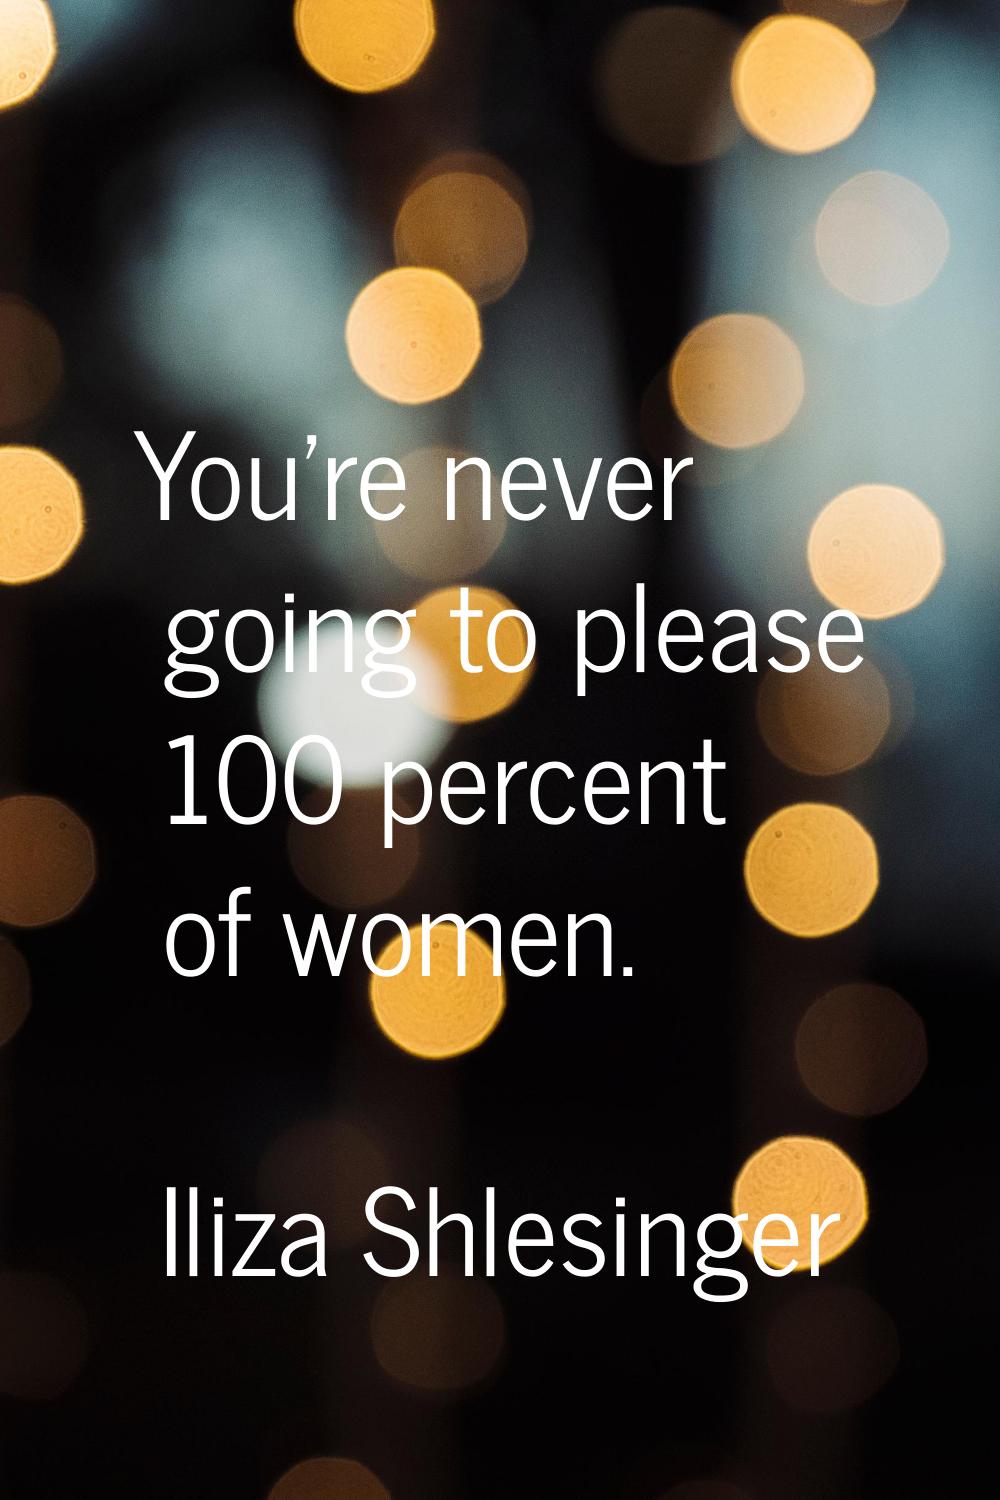 You're never going to please 100 percent of women.